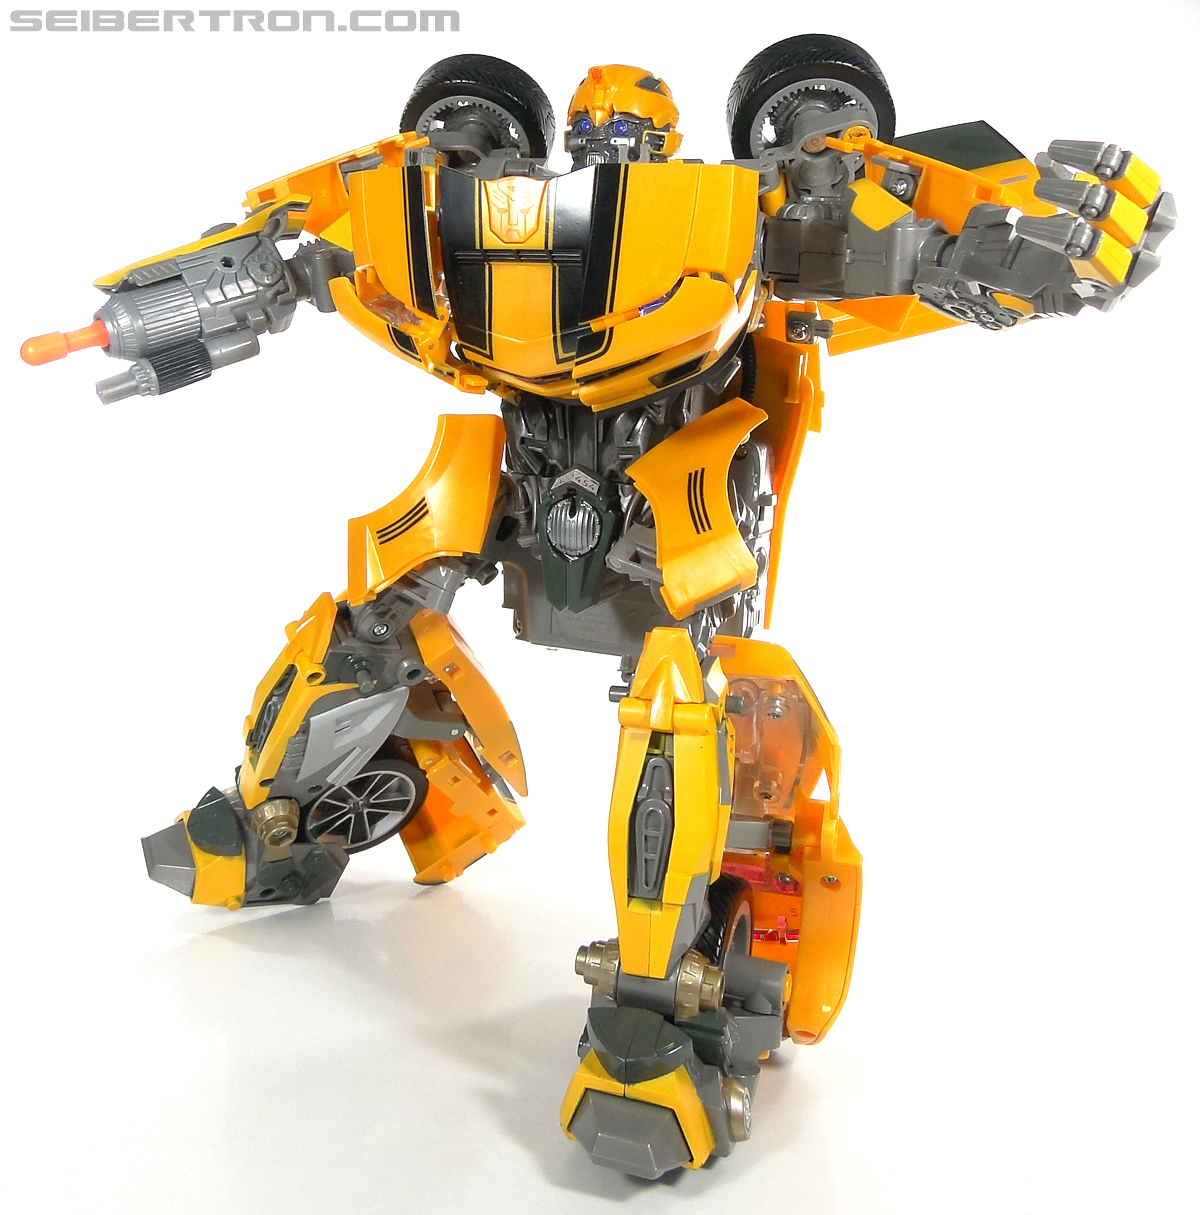 https://static.seibertron.com/images/toys/files/65/ultimate-bumblebee-095.jpg